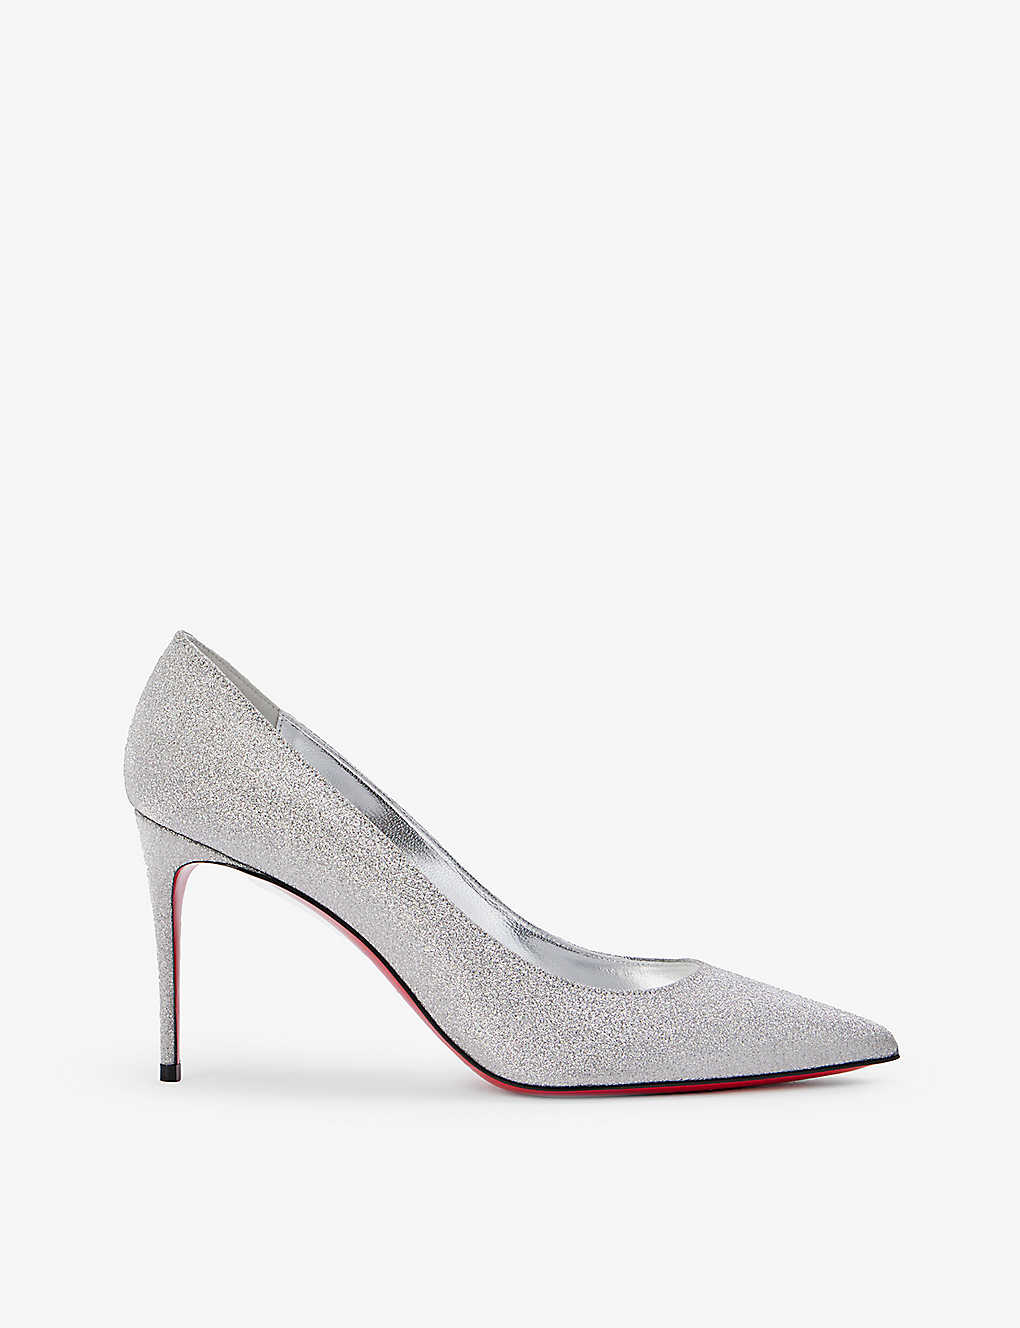 Christian Louboutin Kate 85 Glitter Courts In Silver/lin Silver